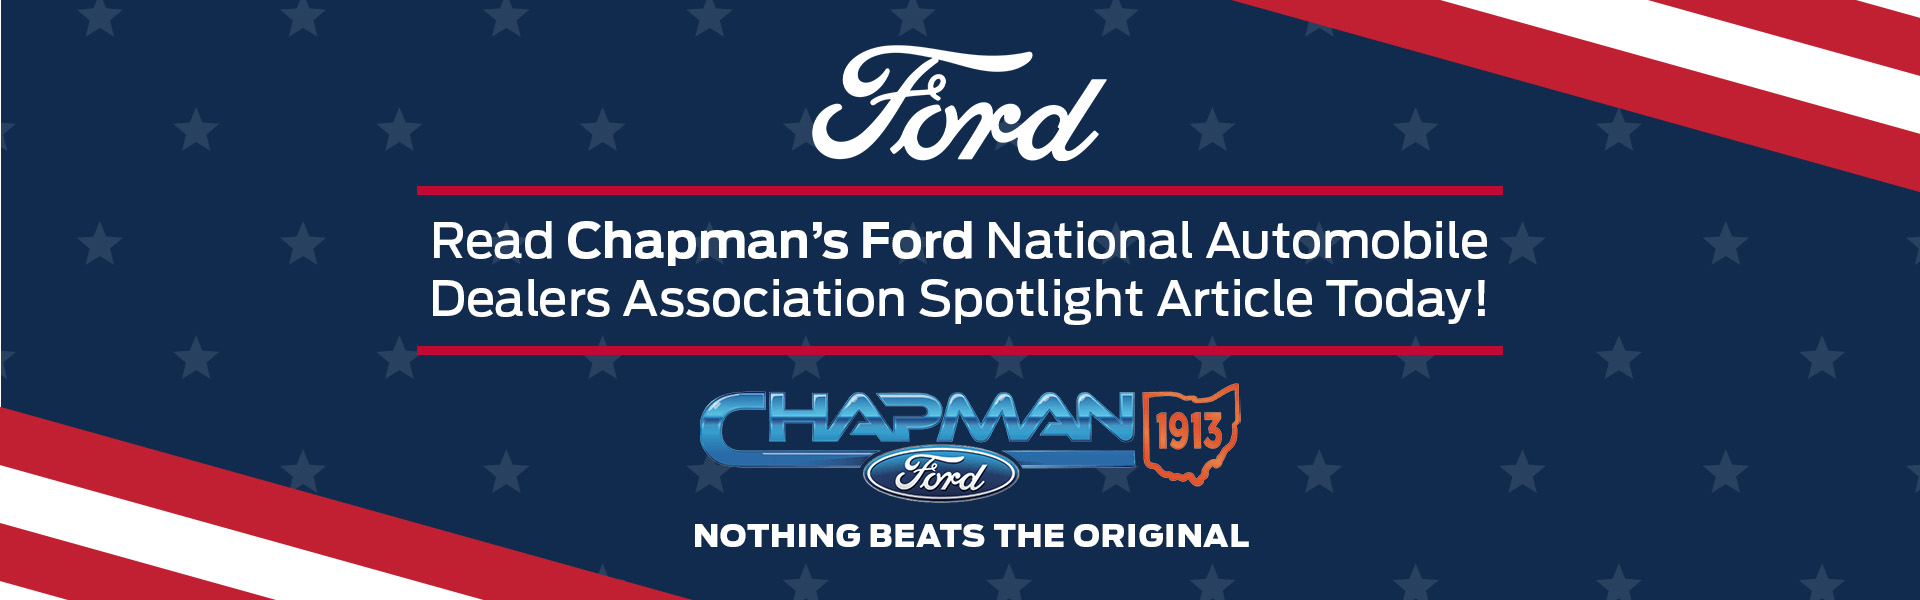 Chapman_Ford_Banner_For_Approval